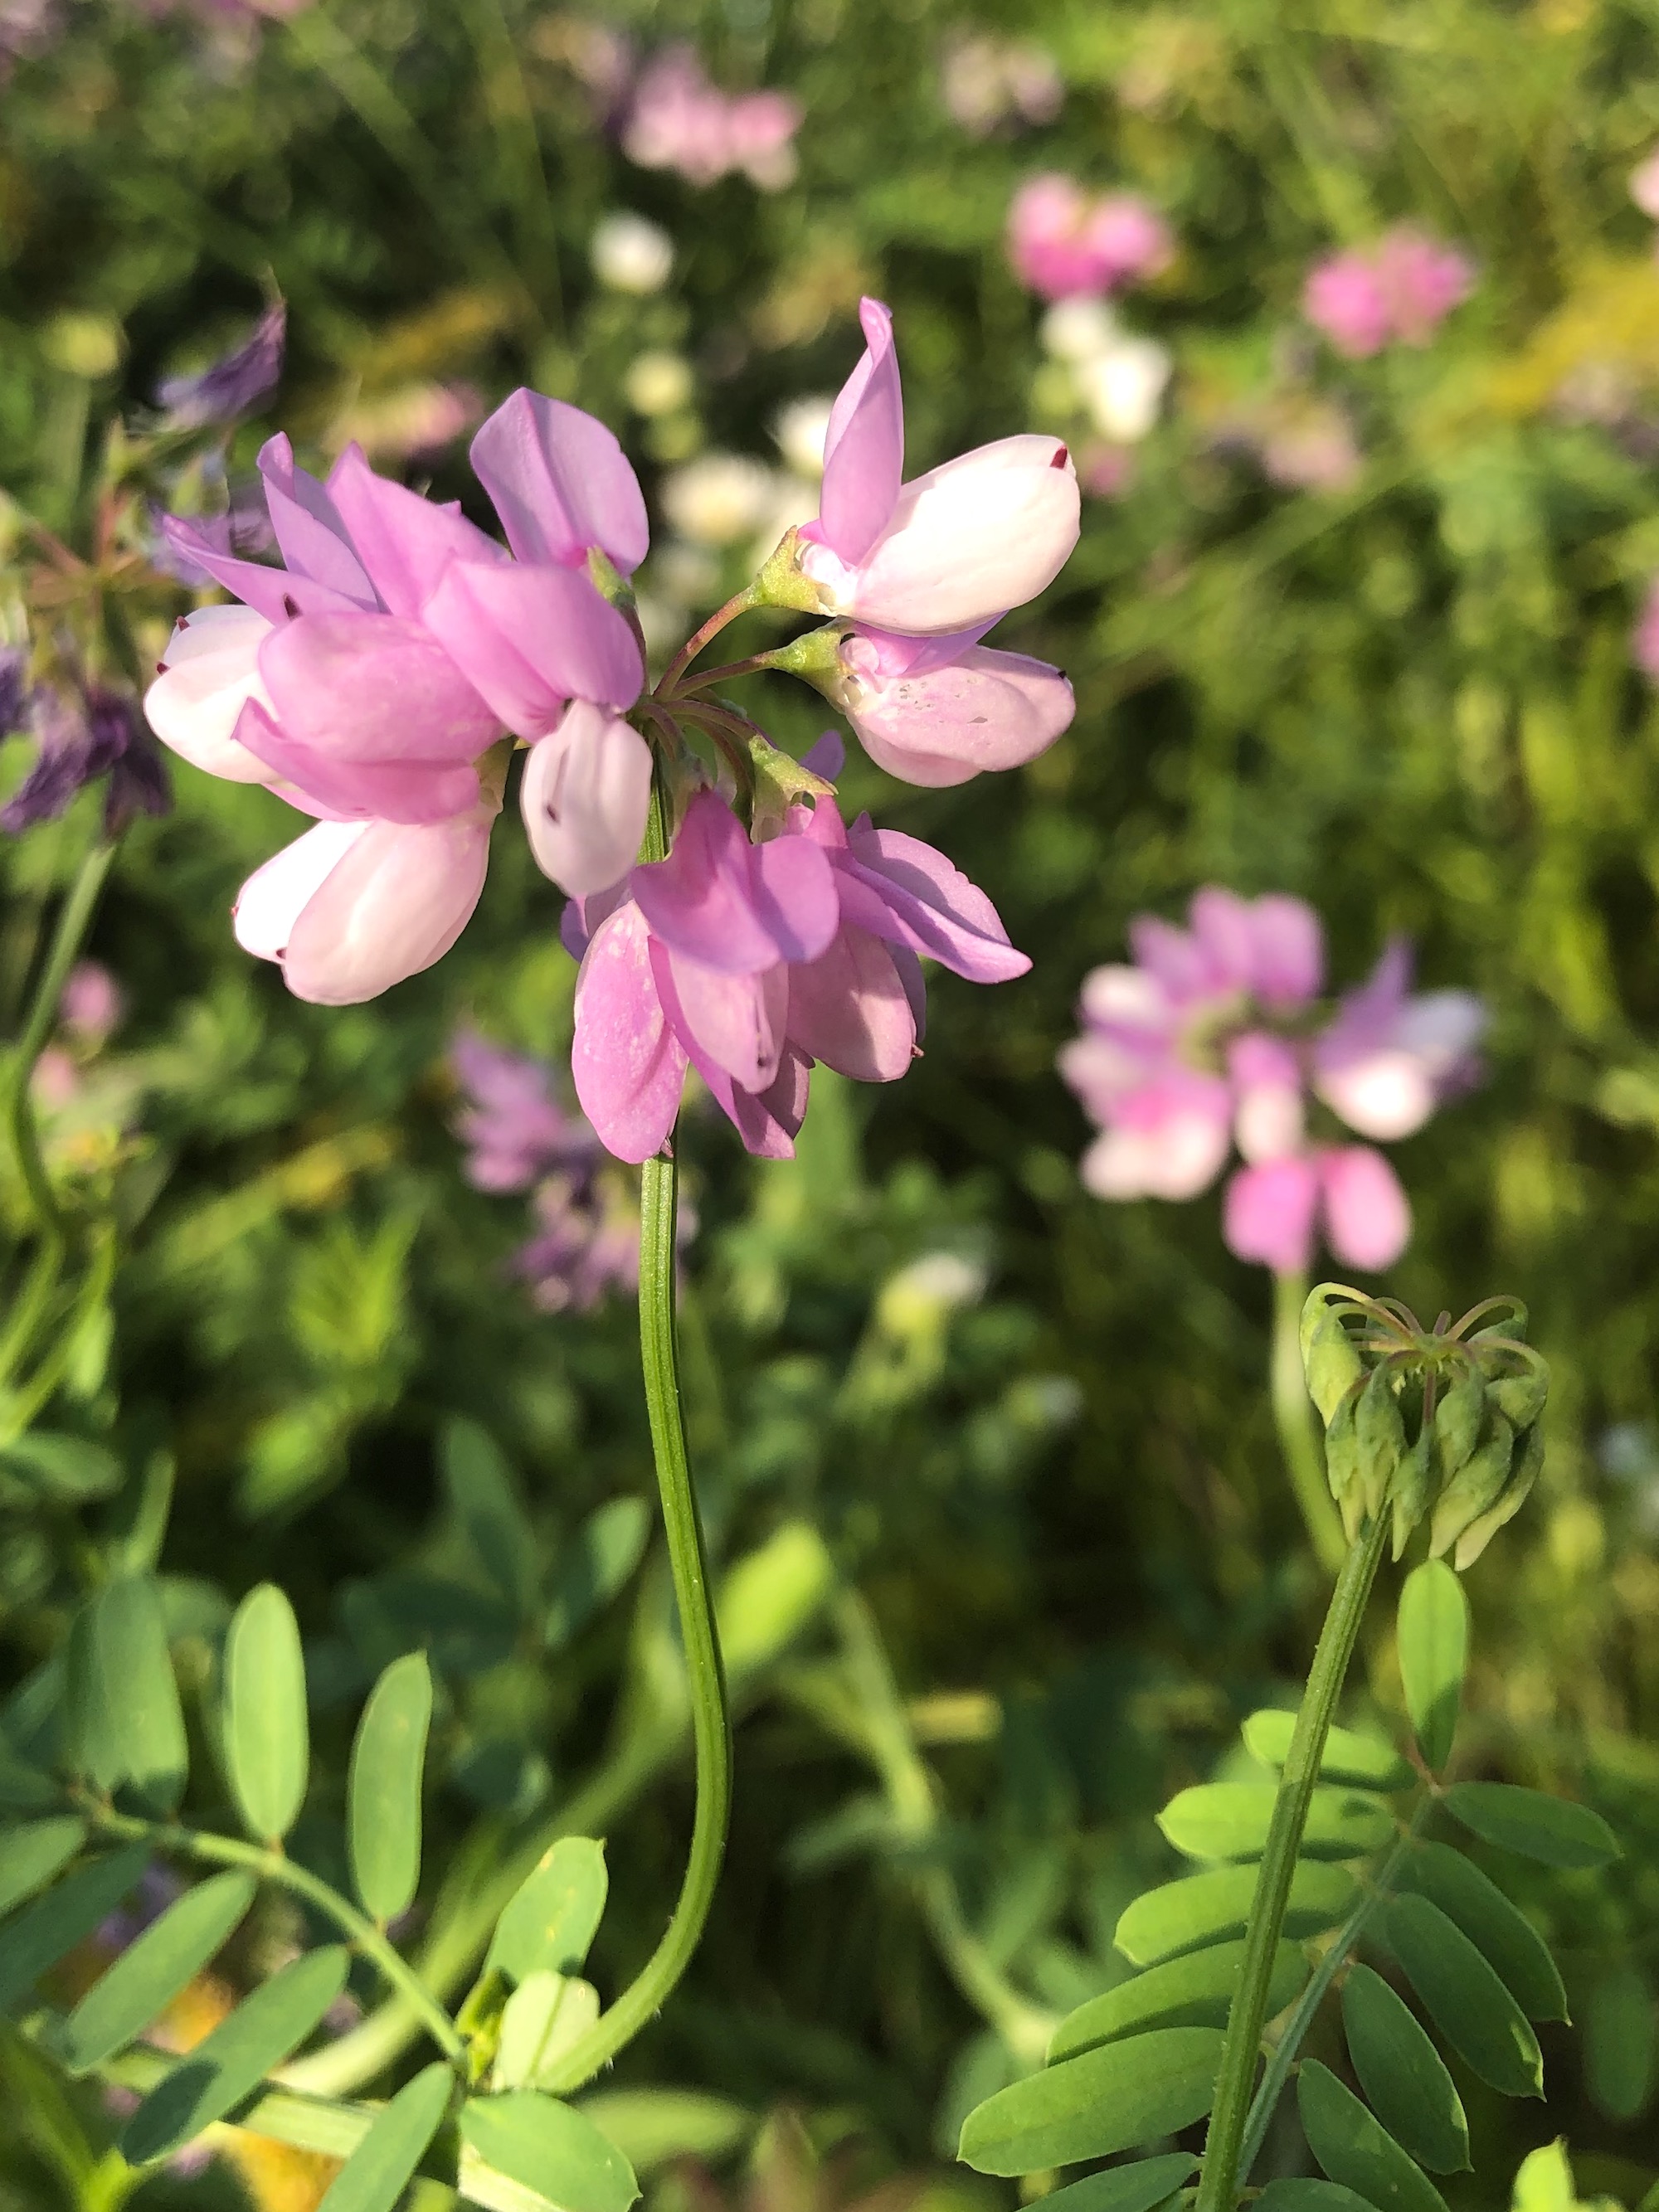 Crown Vetch on shore of Lake Wingra on July 1, 2020.